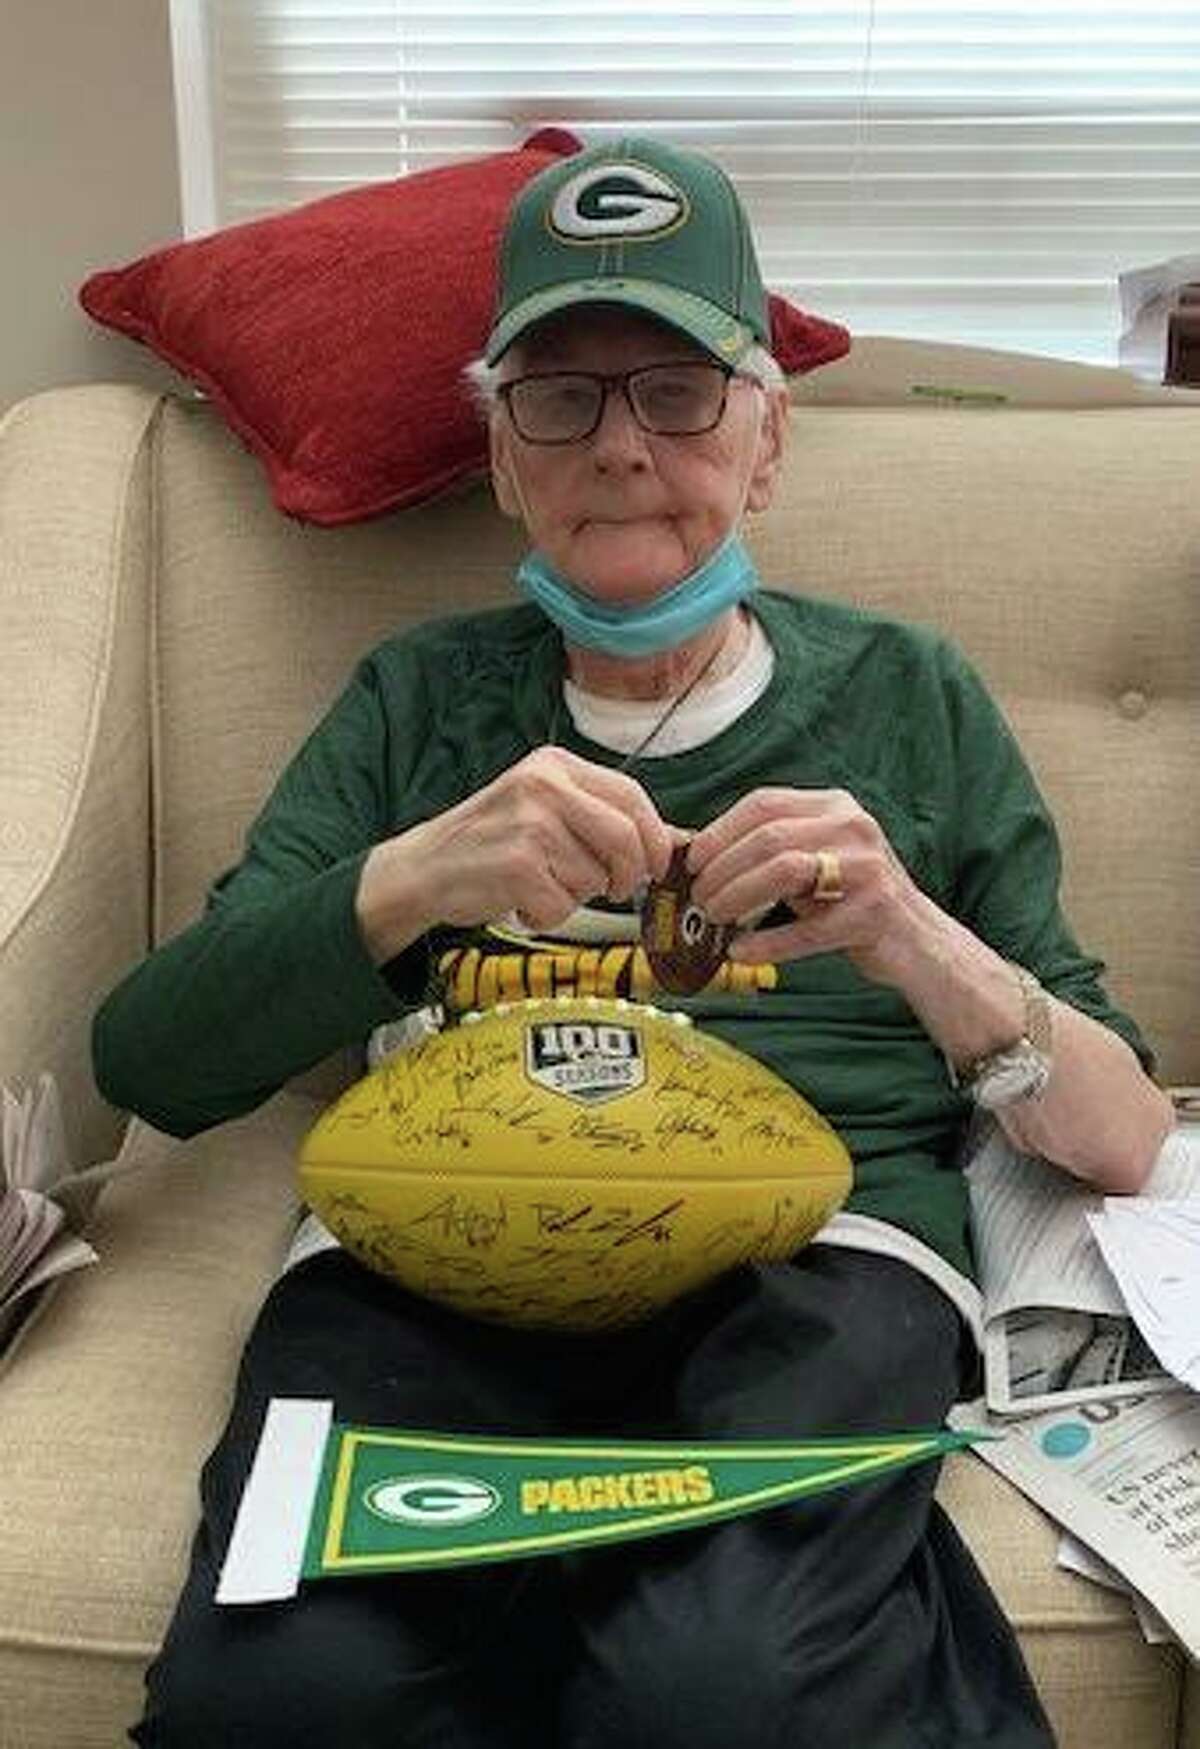 Duane Larsen with his haul of Green Bay Packers loot, including of course a hat.